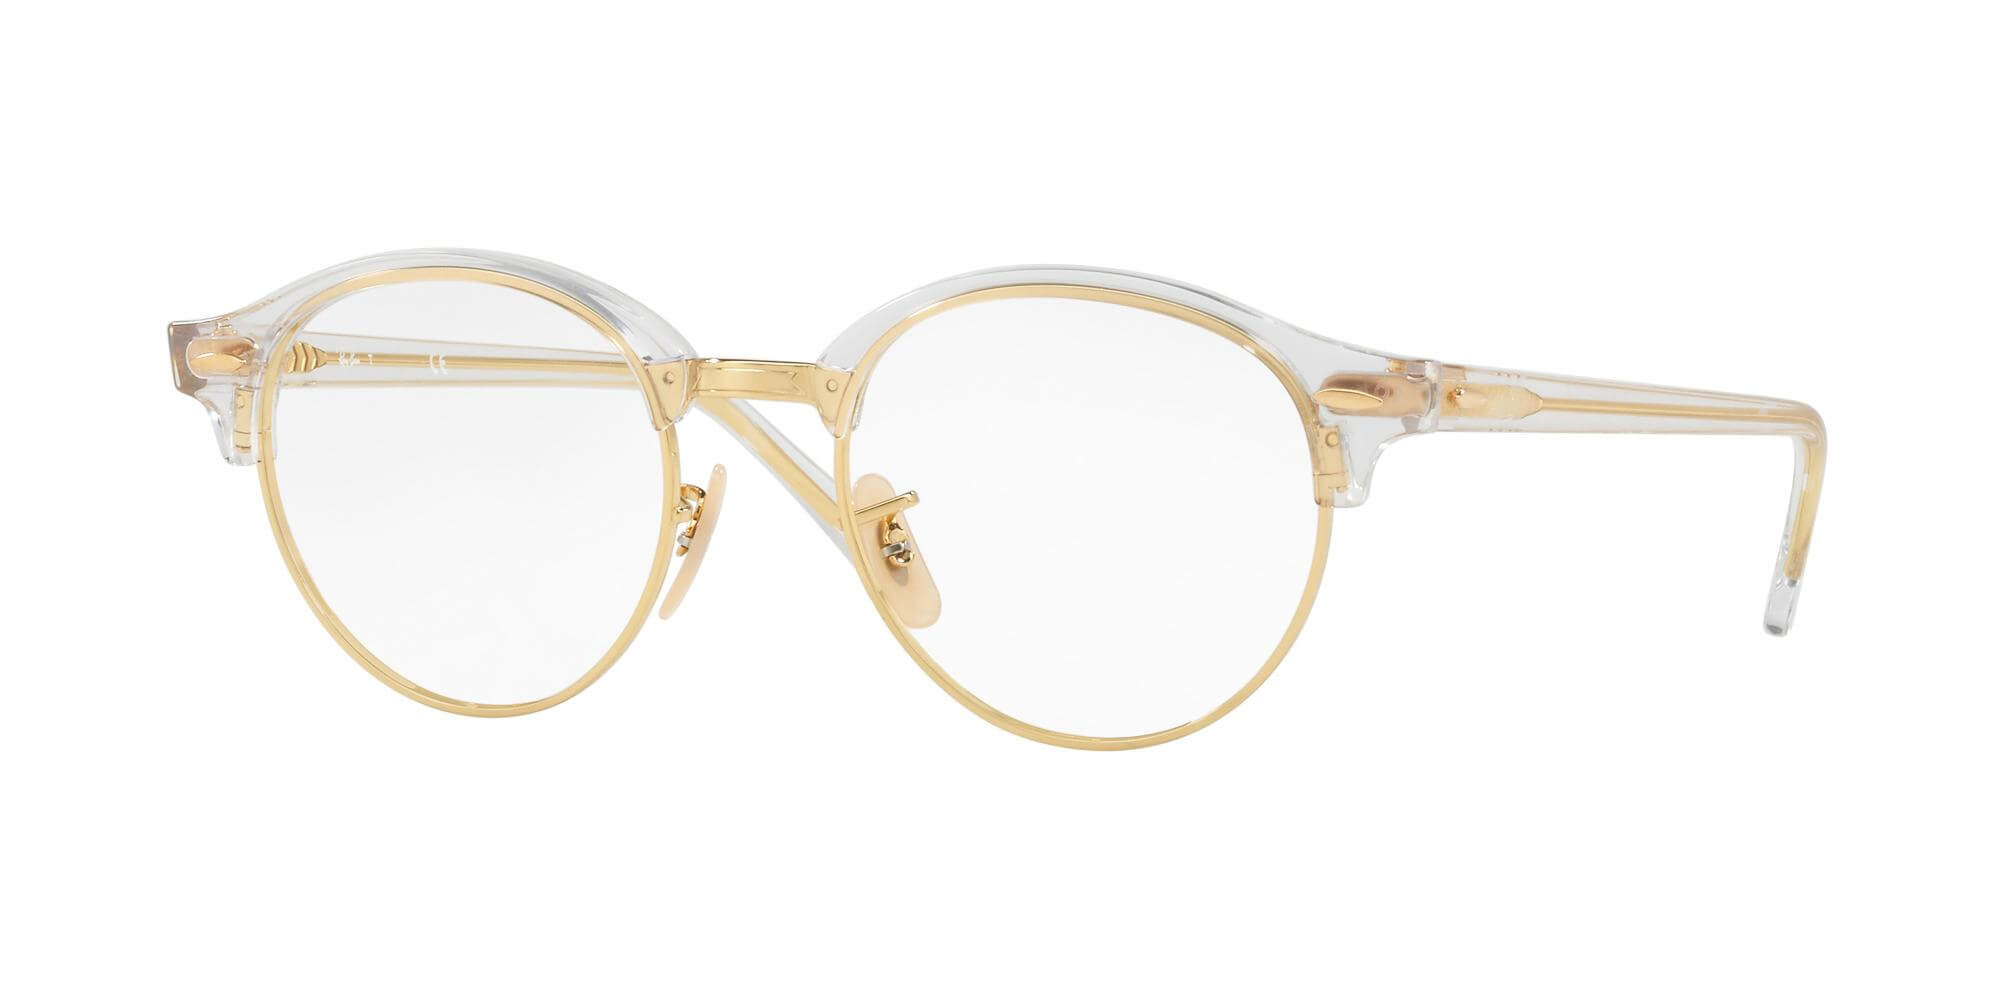 Ray-BanCLUBROUND RX 4246VCrystal Gold (5762)